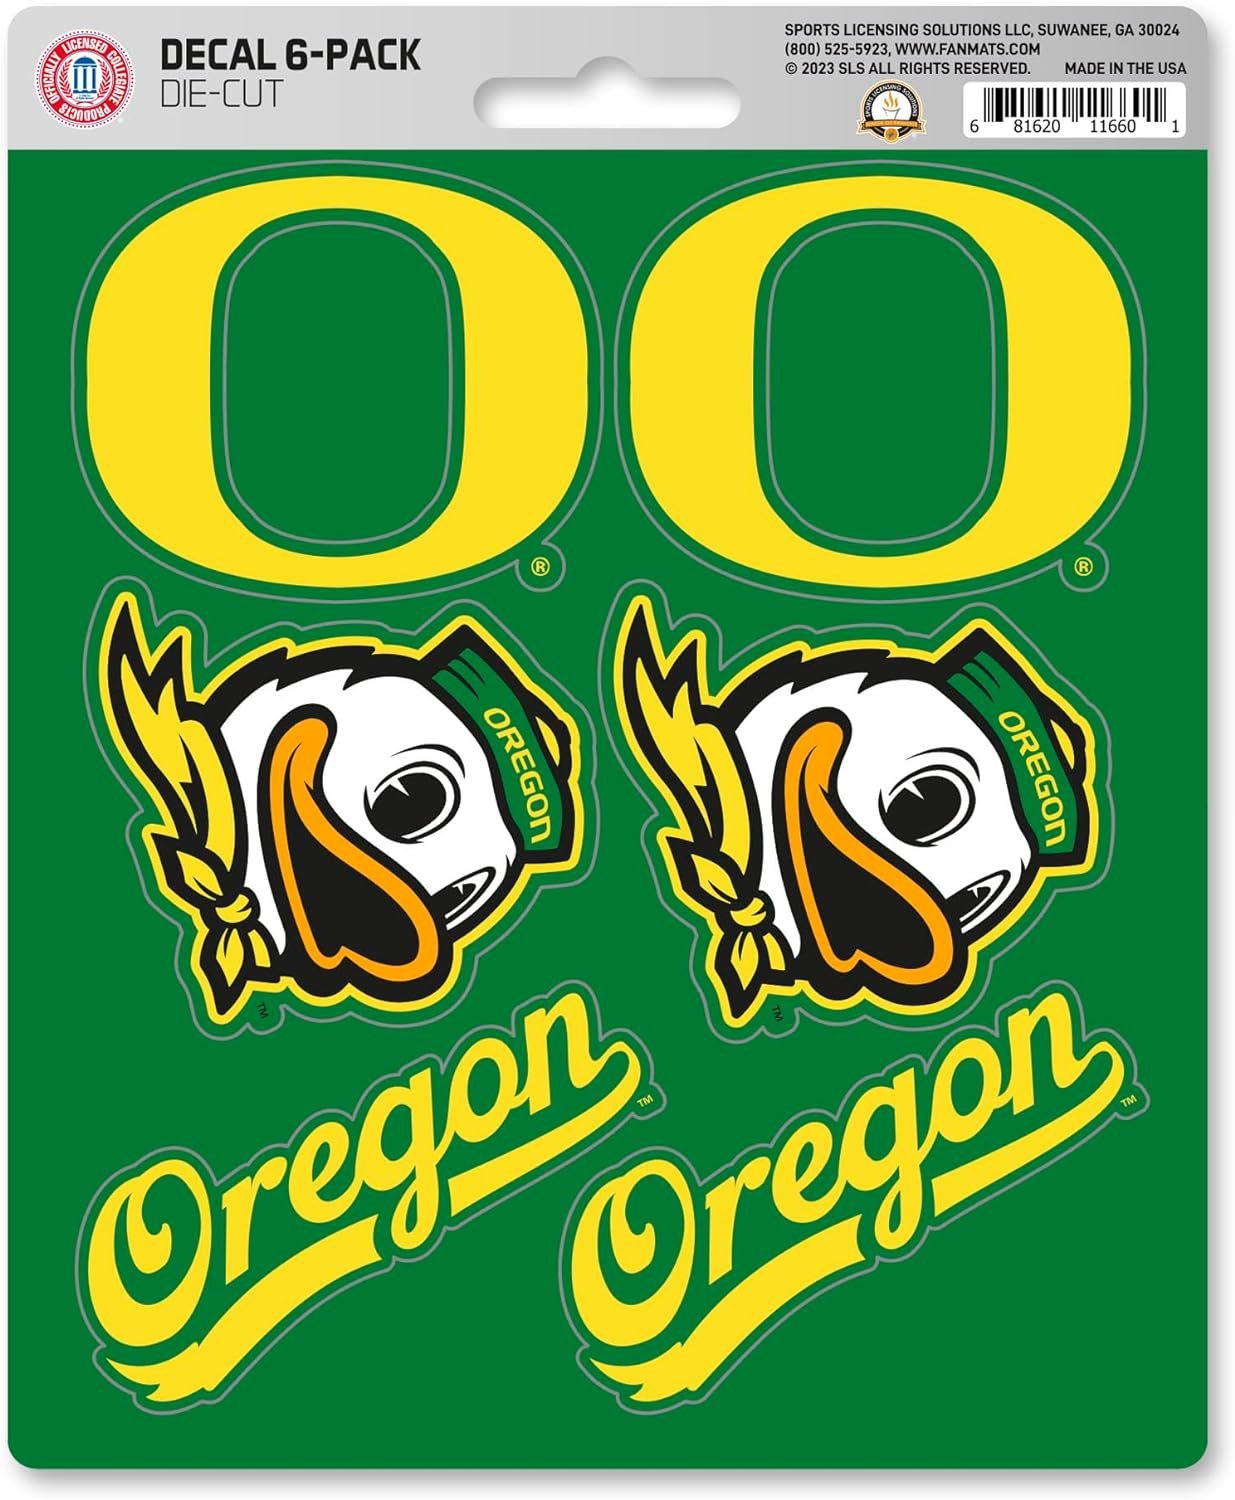 University of Oregon Ducks 6-Piece Decal Sticker Set, 5x6 Inch Sheet, Gift for football fans for any hard surfaces around home, automotive, personal items